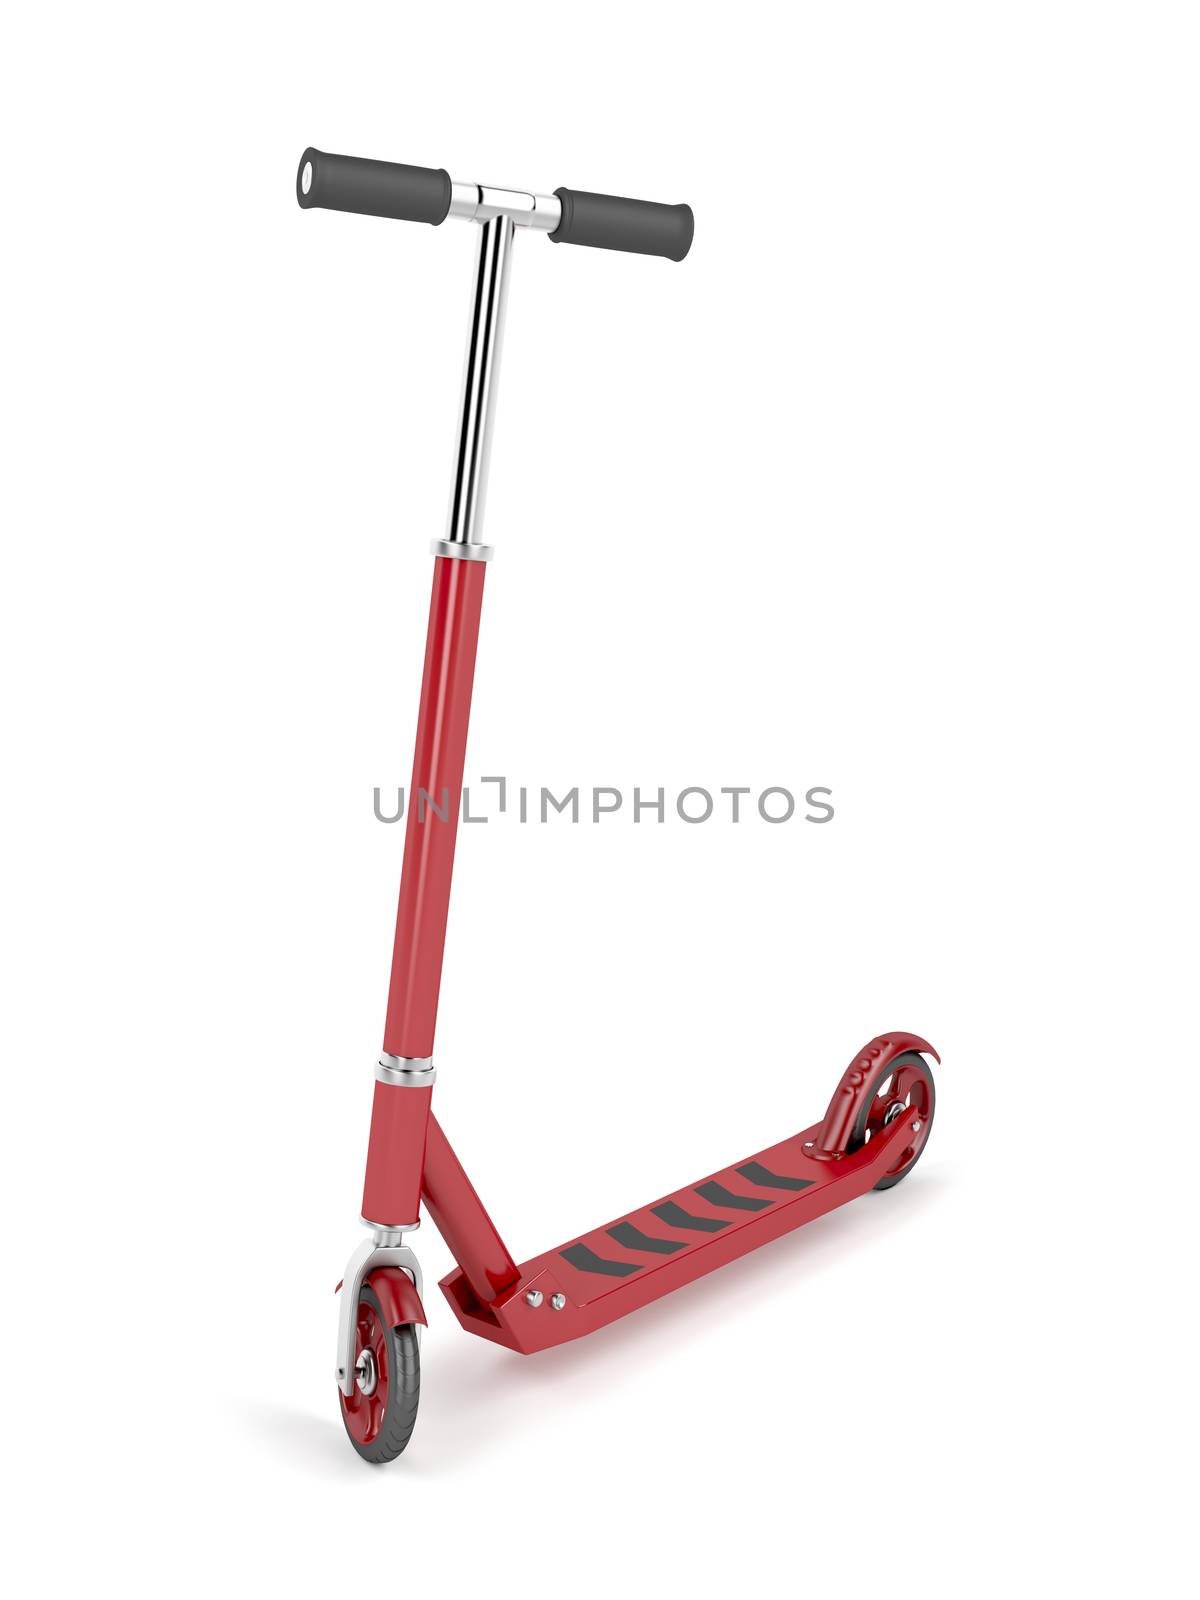 Red kick scooter by magraphics